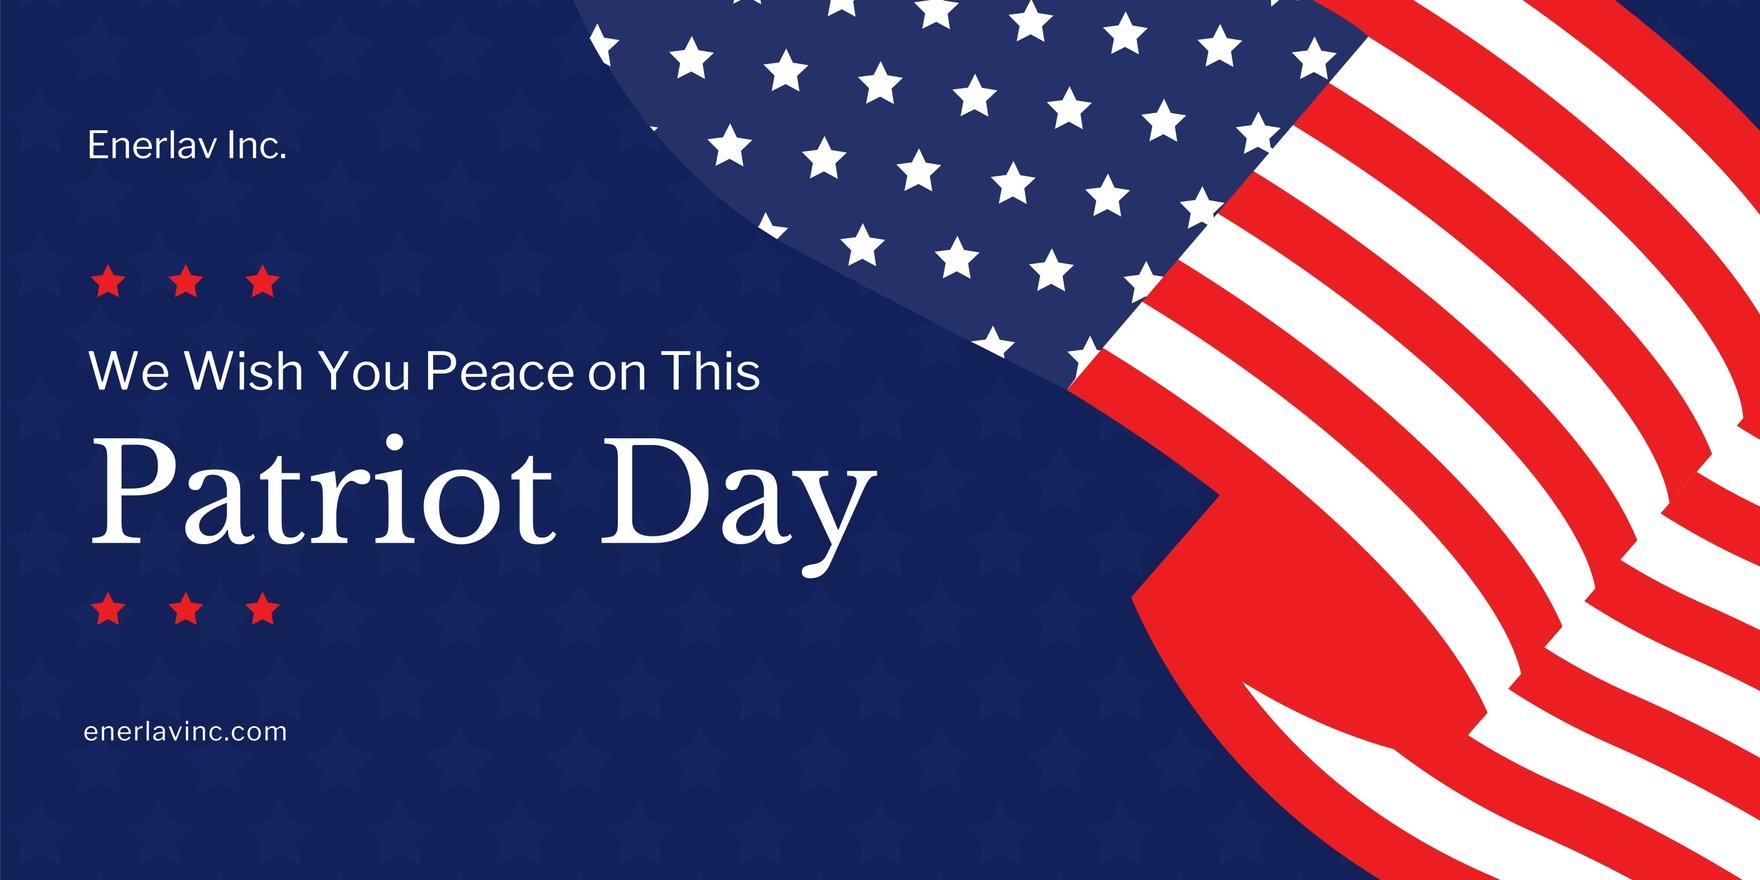 Free Patriot Day Banner Template in Word, Google Docs, Illustrator, PSD, Apple Pages, Publisher